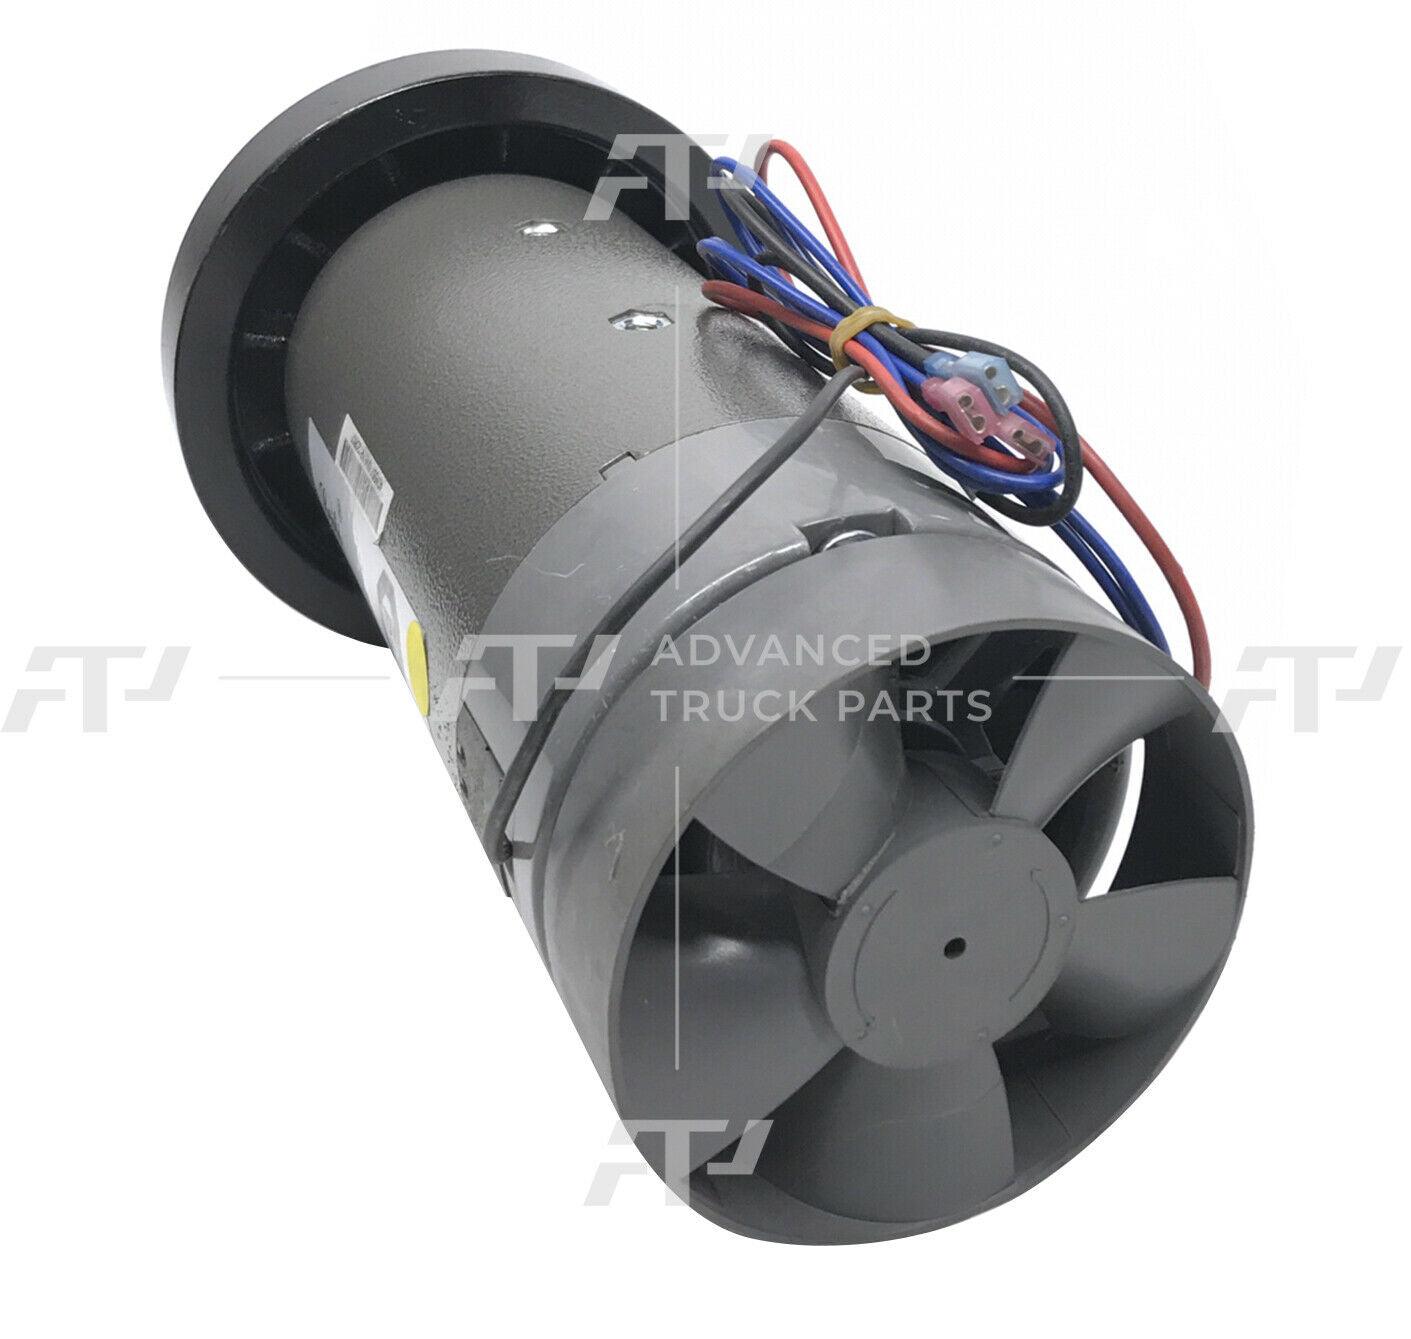 405557 Nordictrack 116Zy2-1 Free Motion Treadmill 4.25Hp Dc Drive Motor - ADVANCED TRUCK PARTS